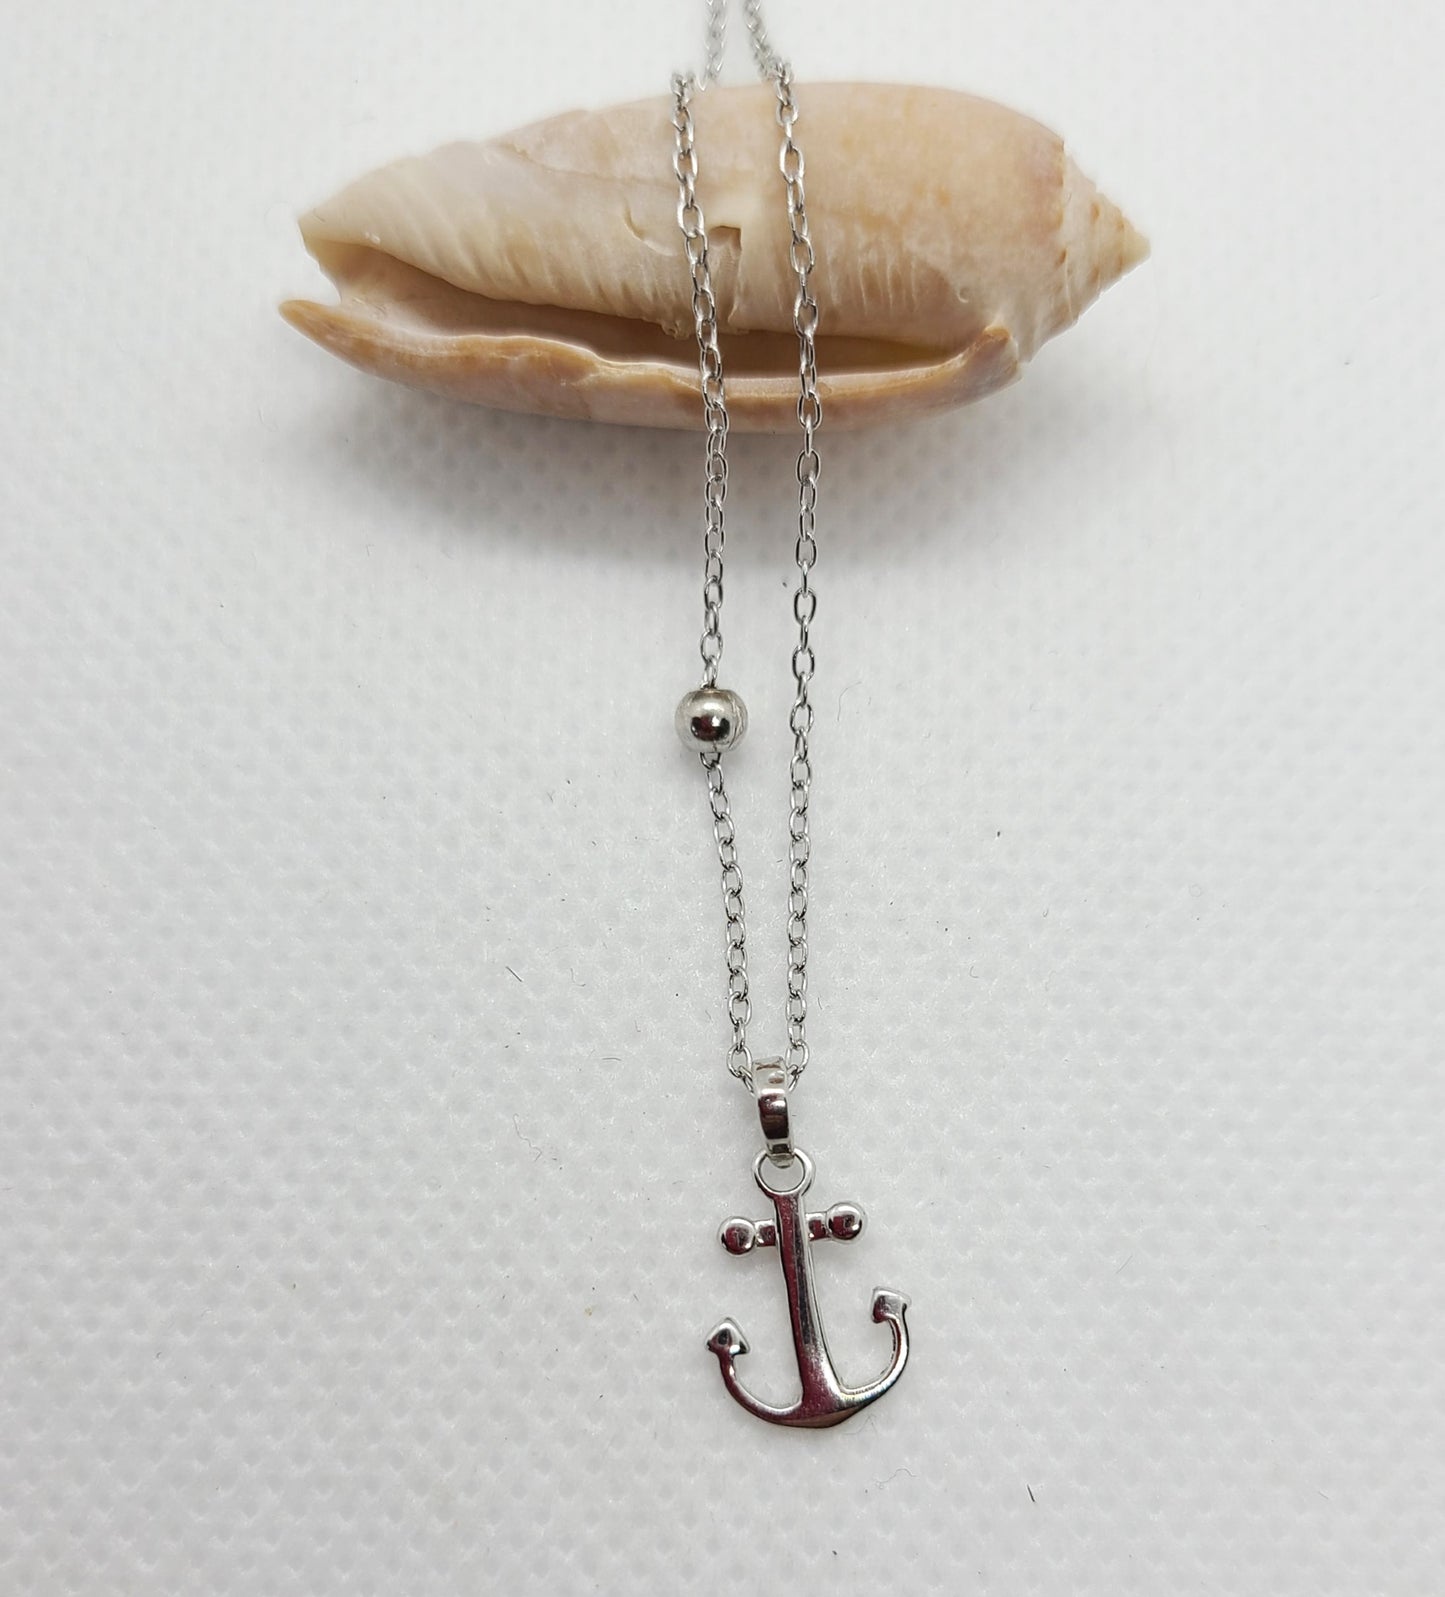 Petite Necklace  Small anchor with floating bead.  Sterling Silver with Rhodium Plating, Never Needs Polishing  Chain is approximately 16 inches long, Plus extension on necklace adds another 1.5 inches